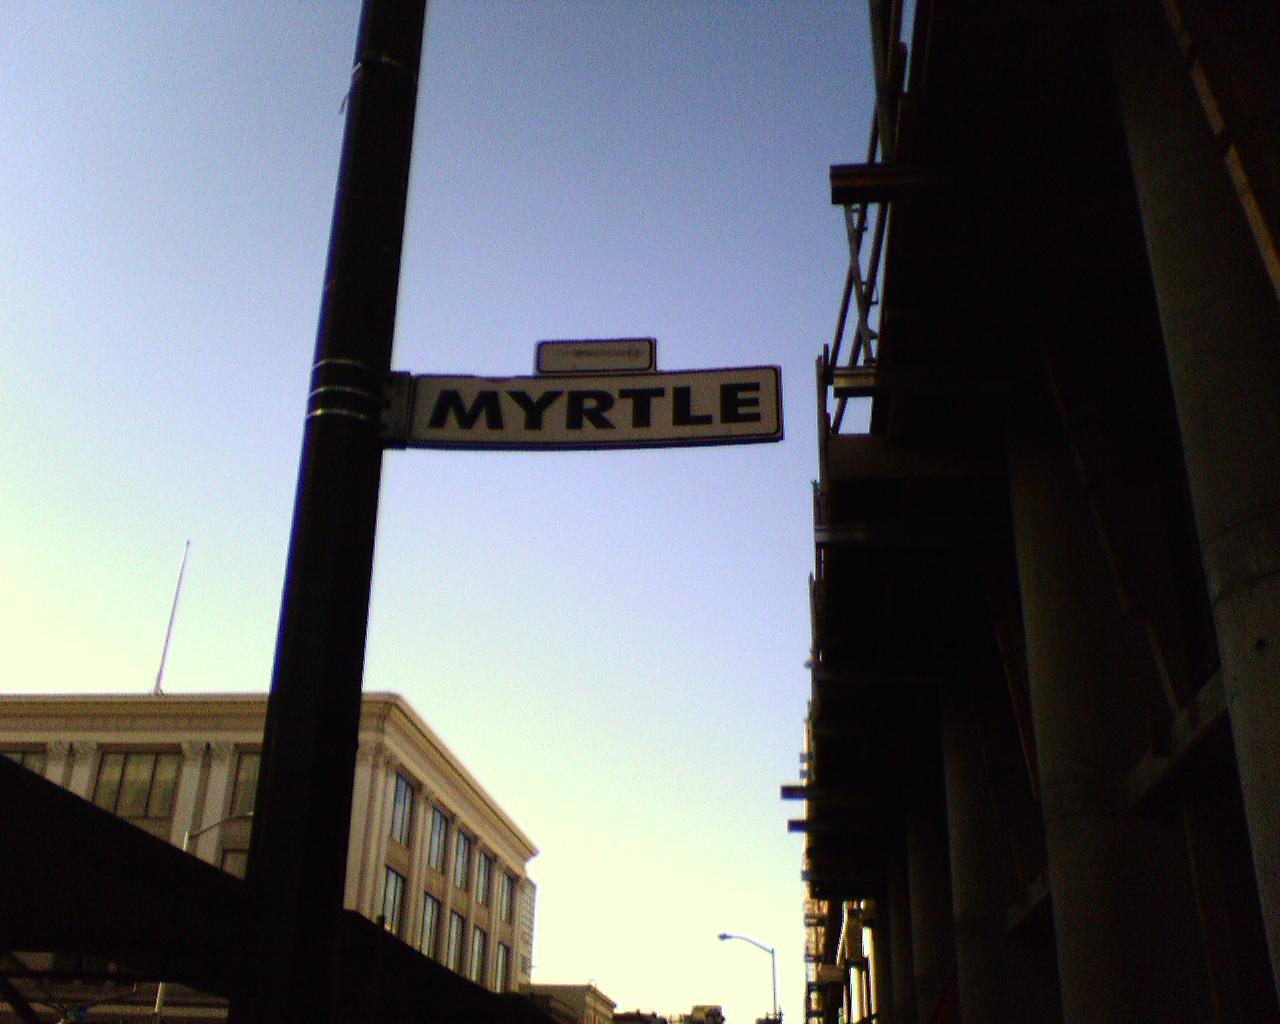 a close up of street sign with buildings in the background